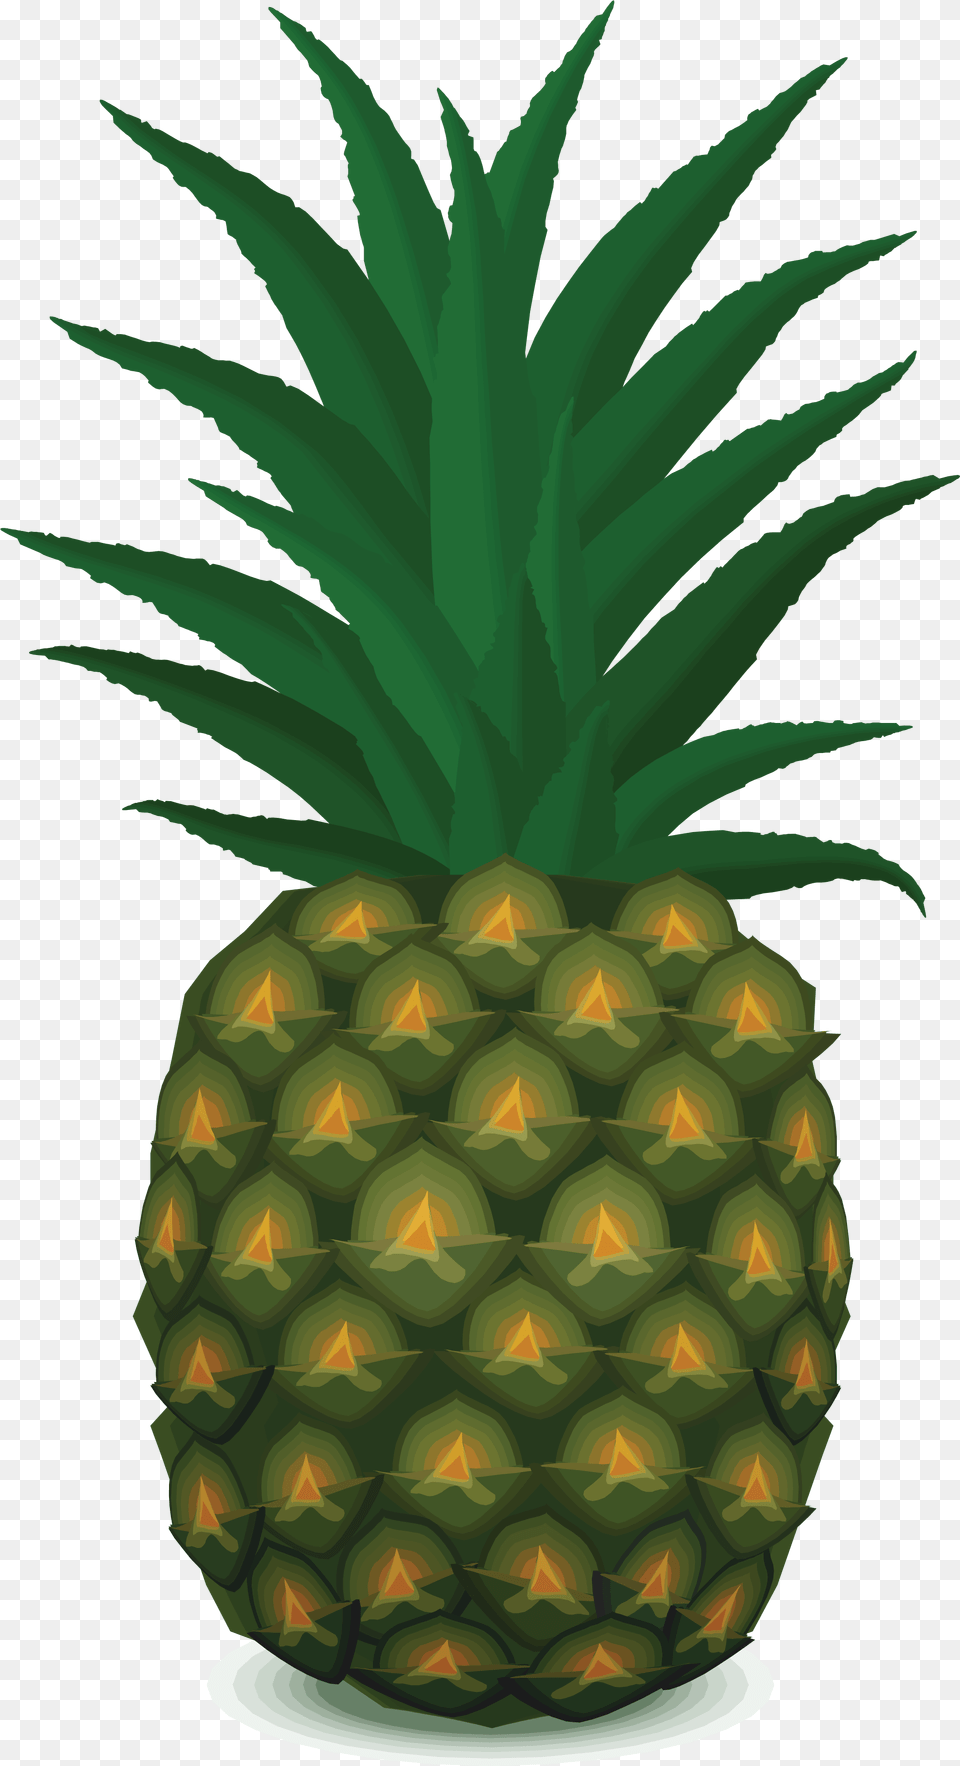 Pineapple Image Pineapple Vector, Food, Fruit, Plant, Produce Png